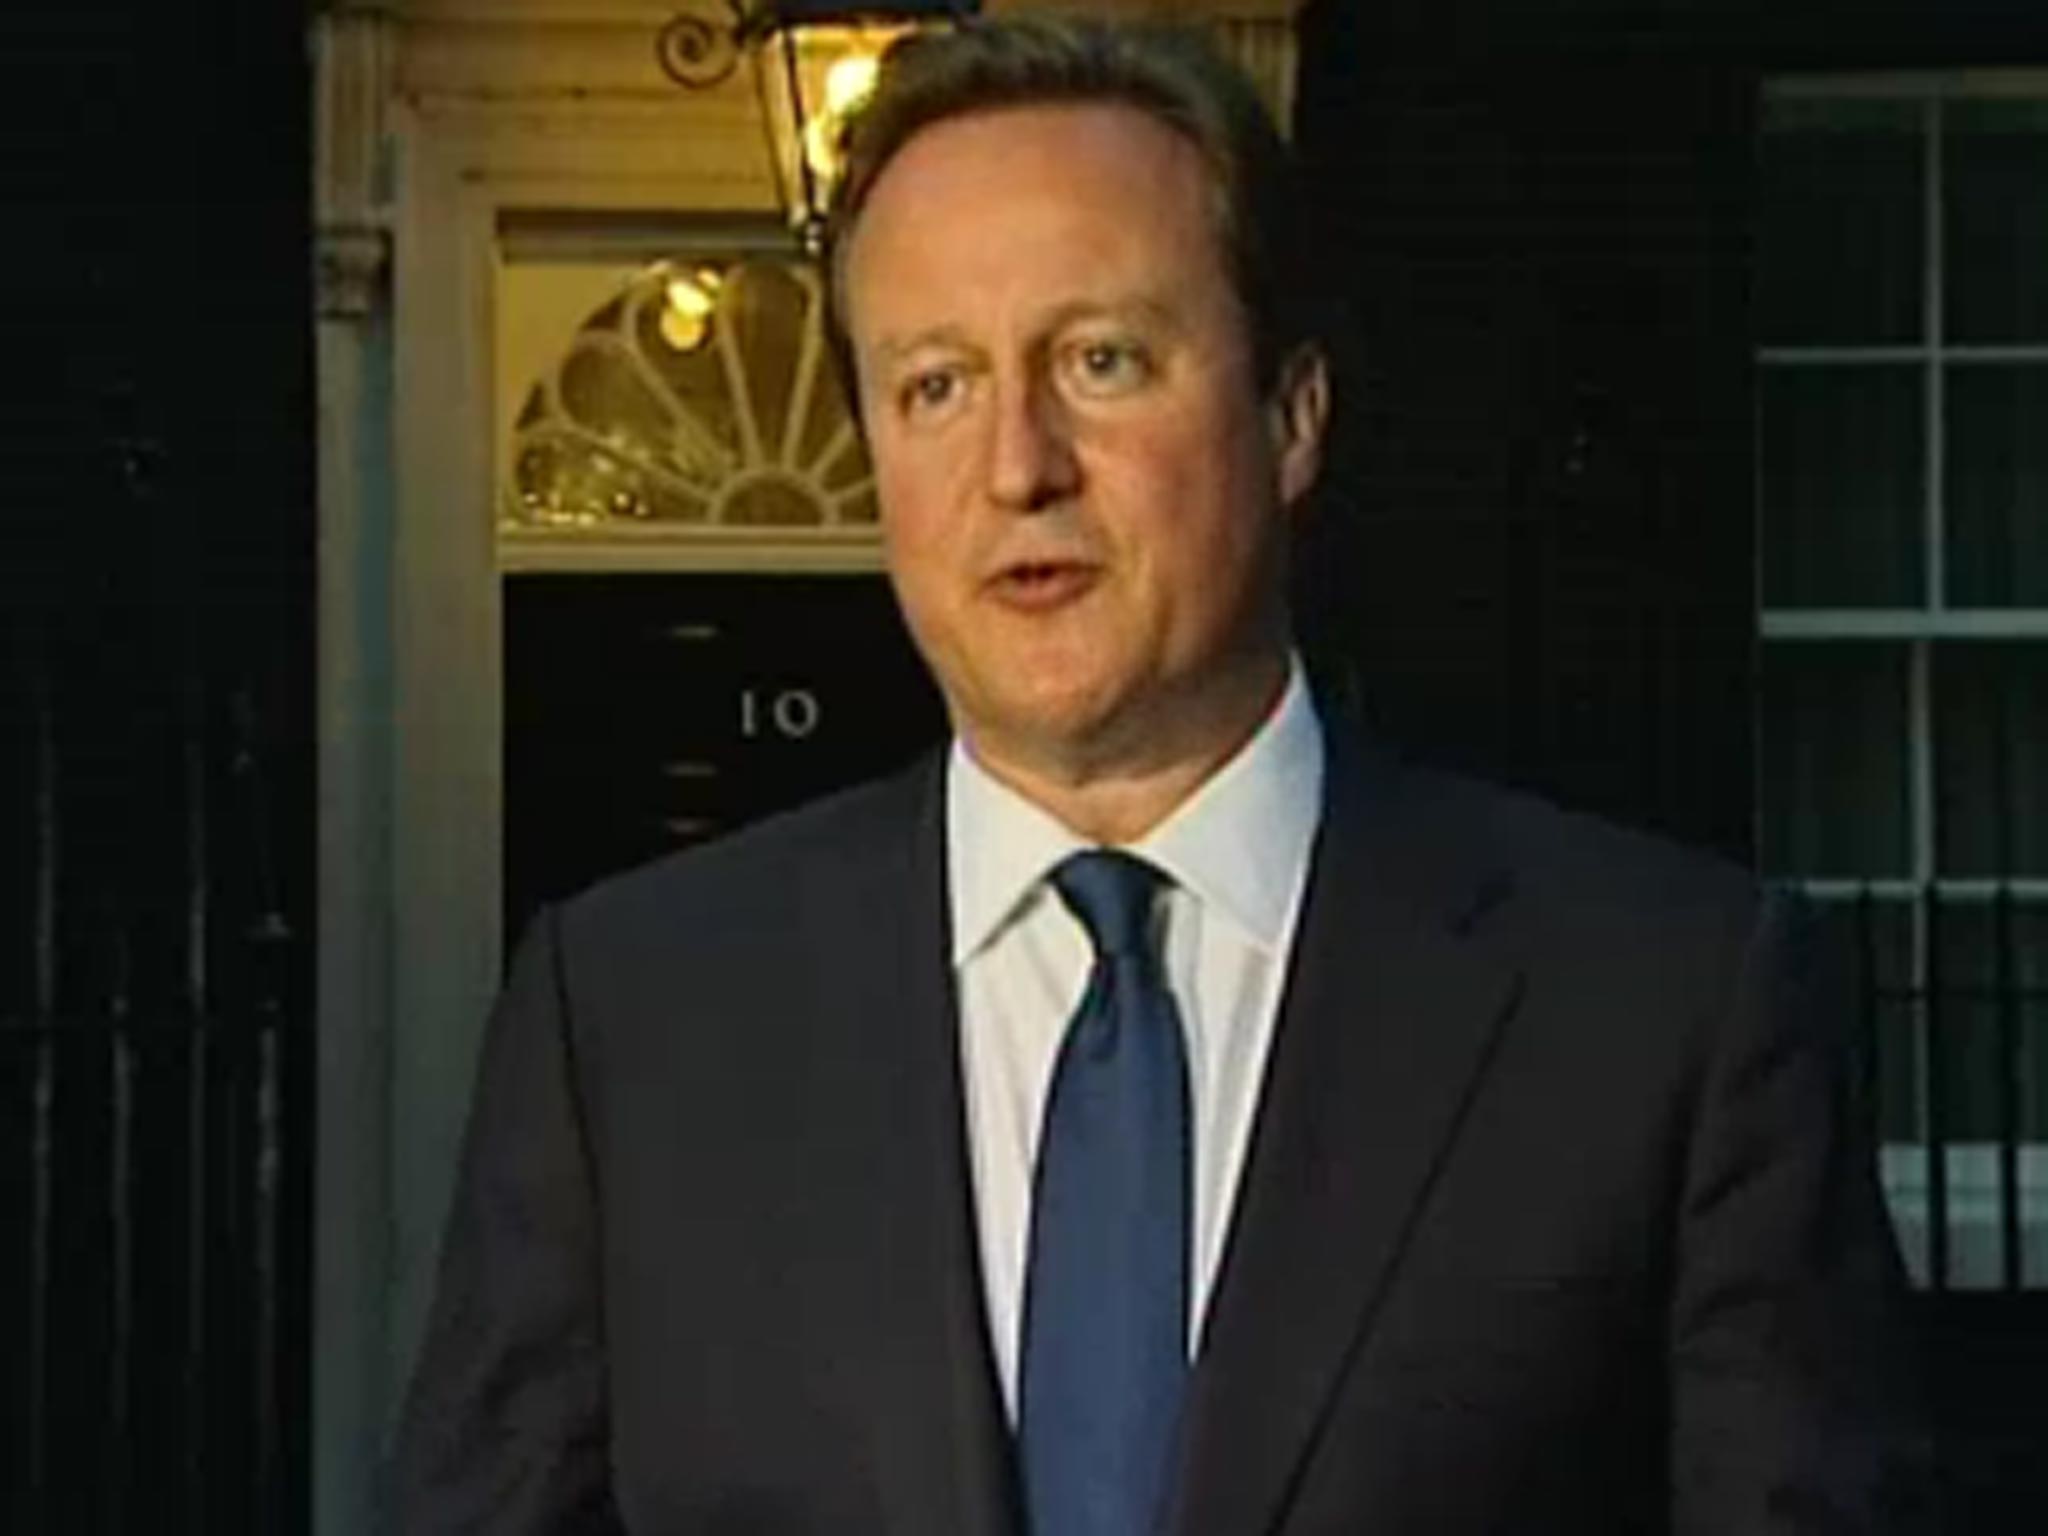 David Cameron has said he will allow his children to have Facebook accounts - but only if he is able to monitor them